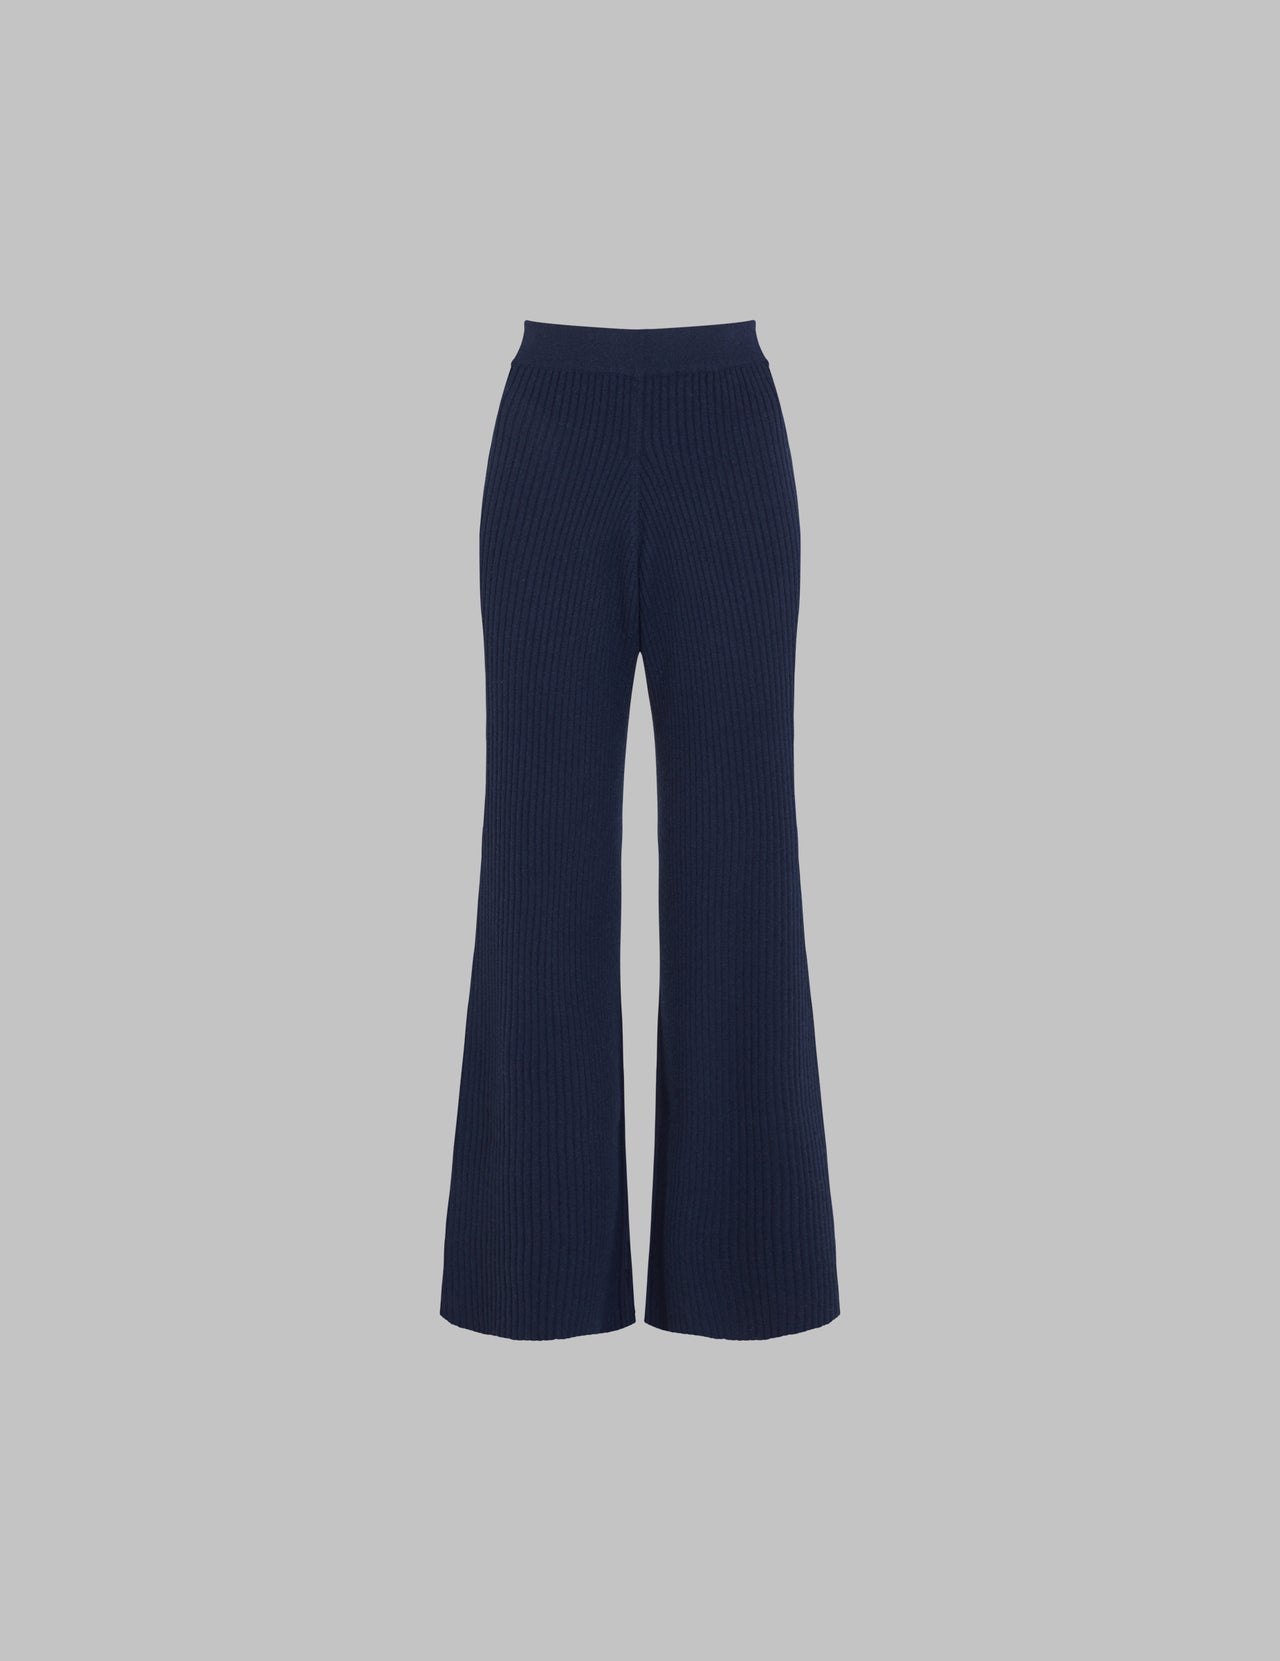  Navy Ribbed Cashmere Trousers 